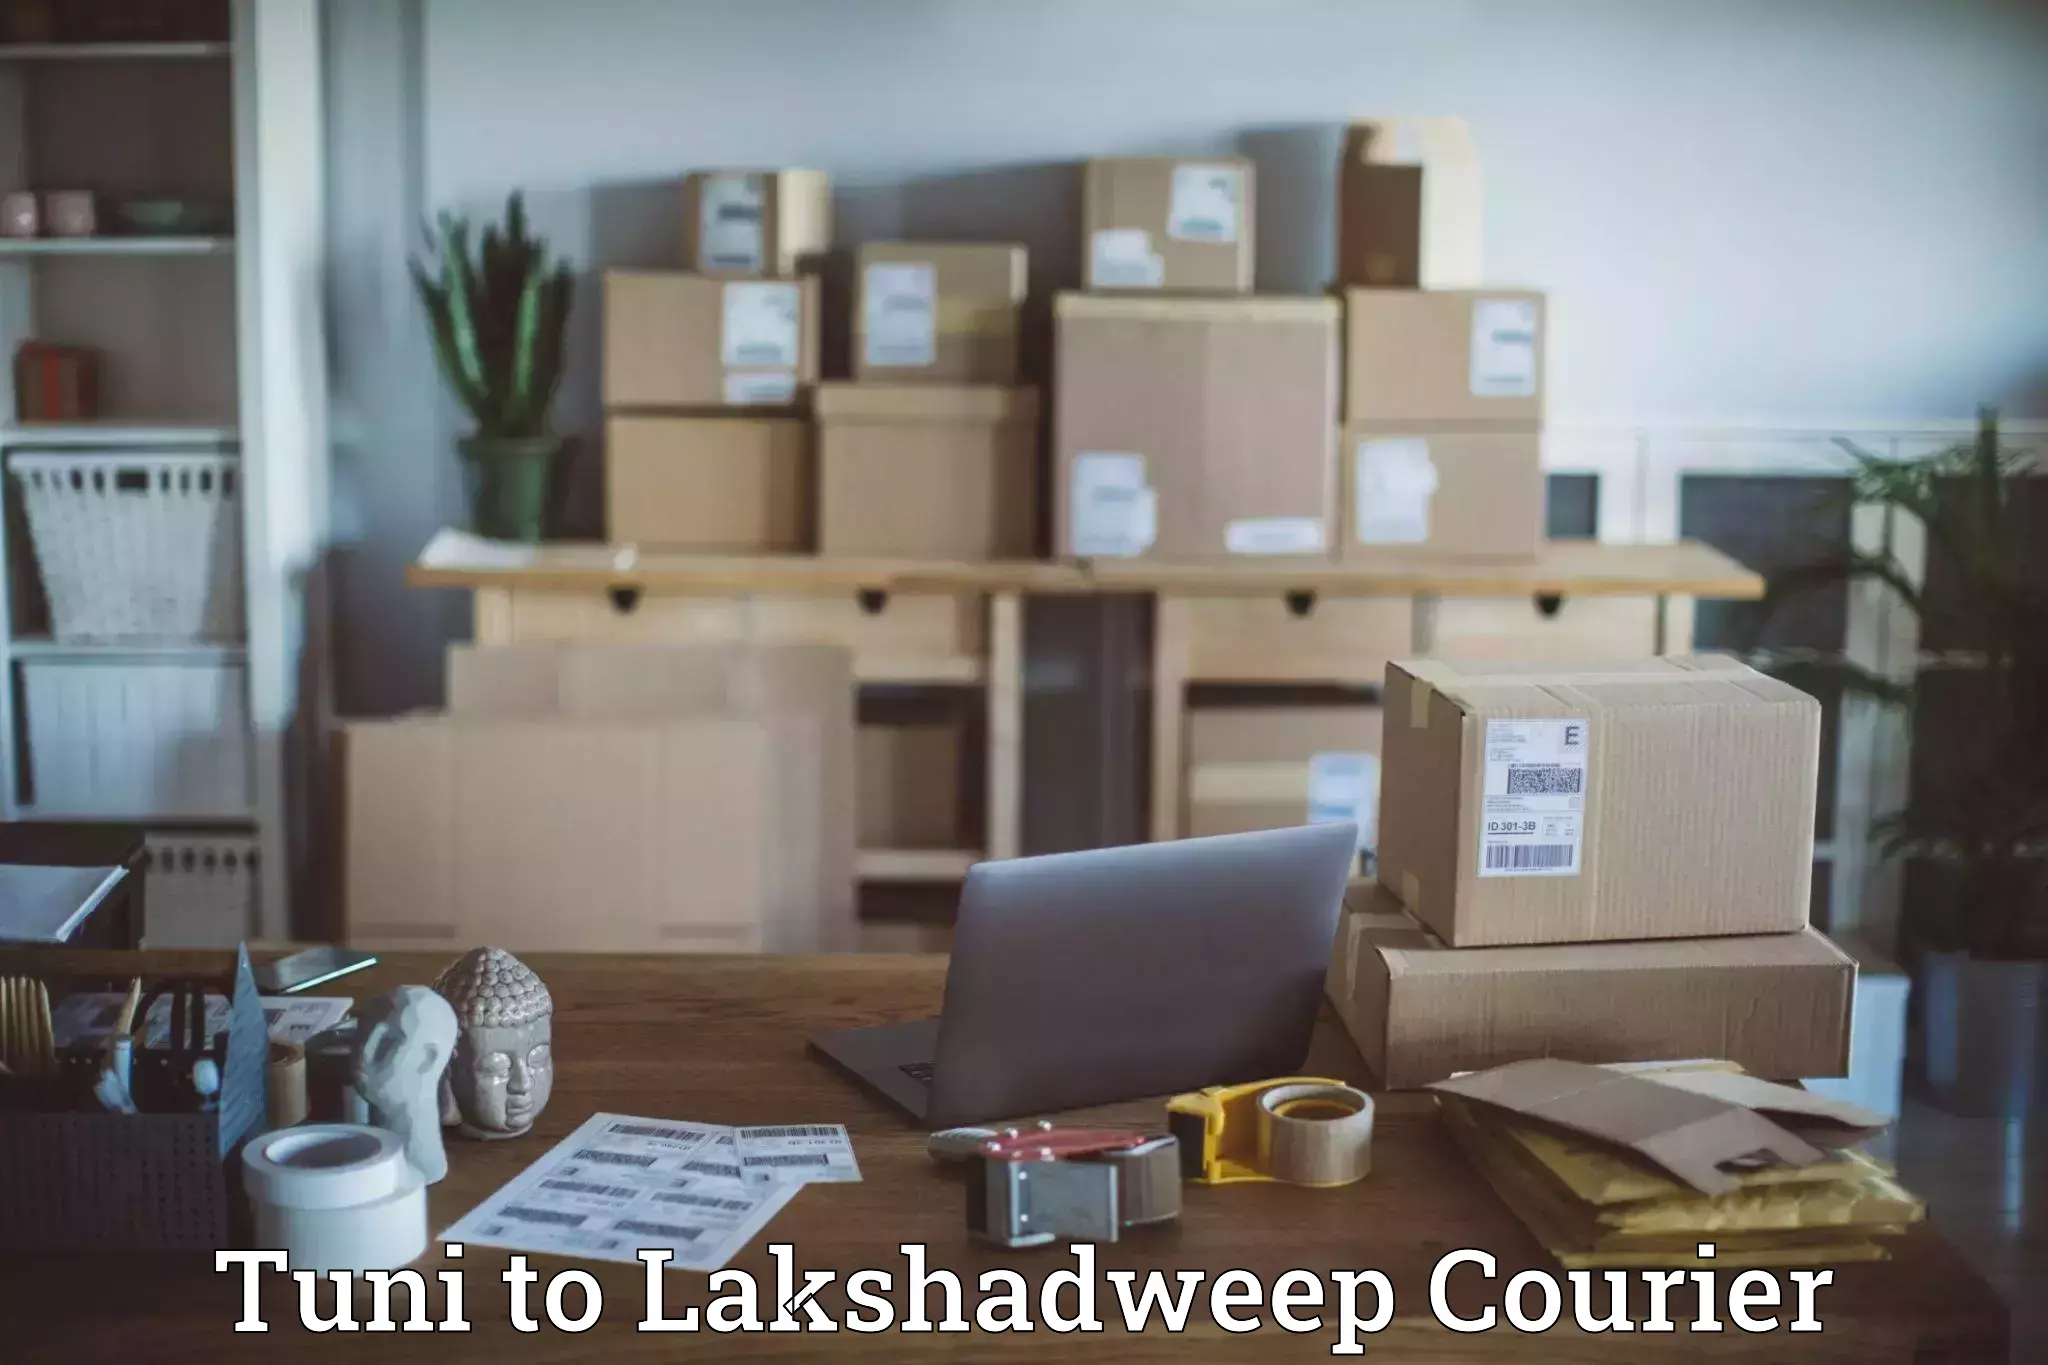 Express courier facilities in Tuni to Lakshadweep